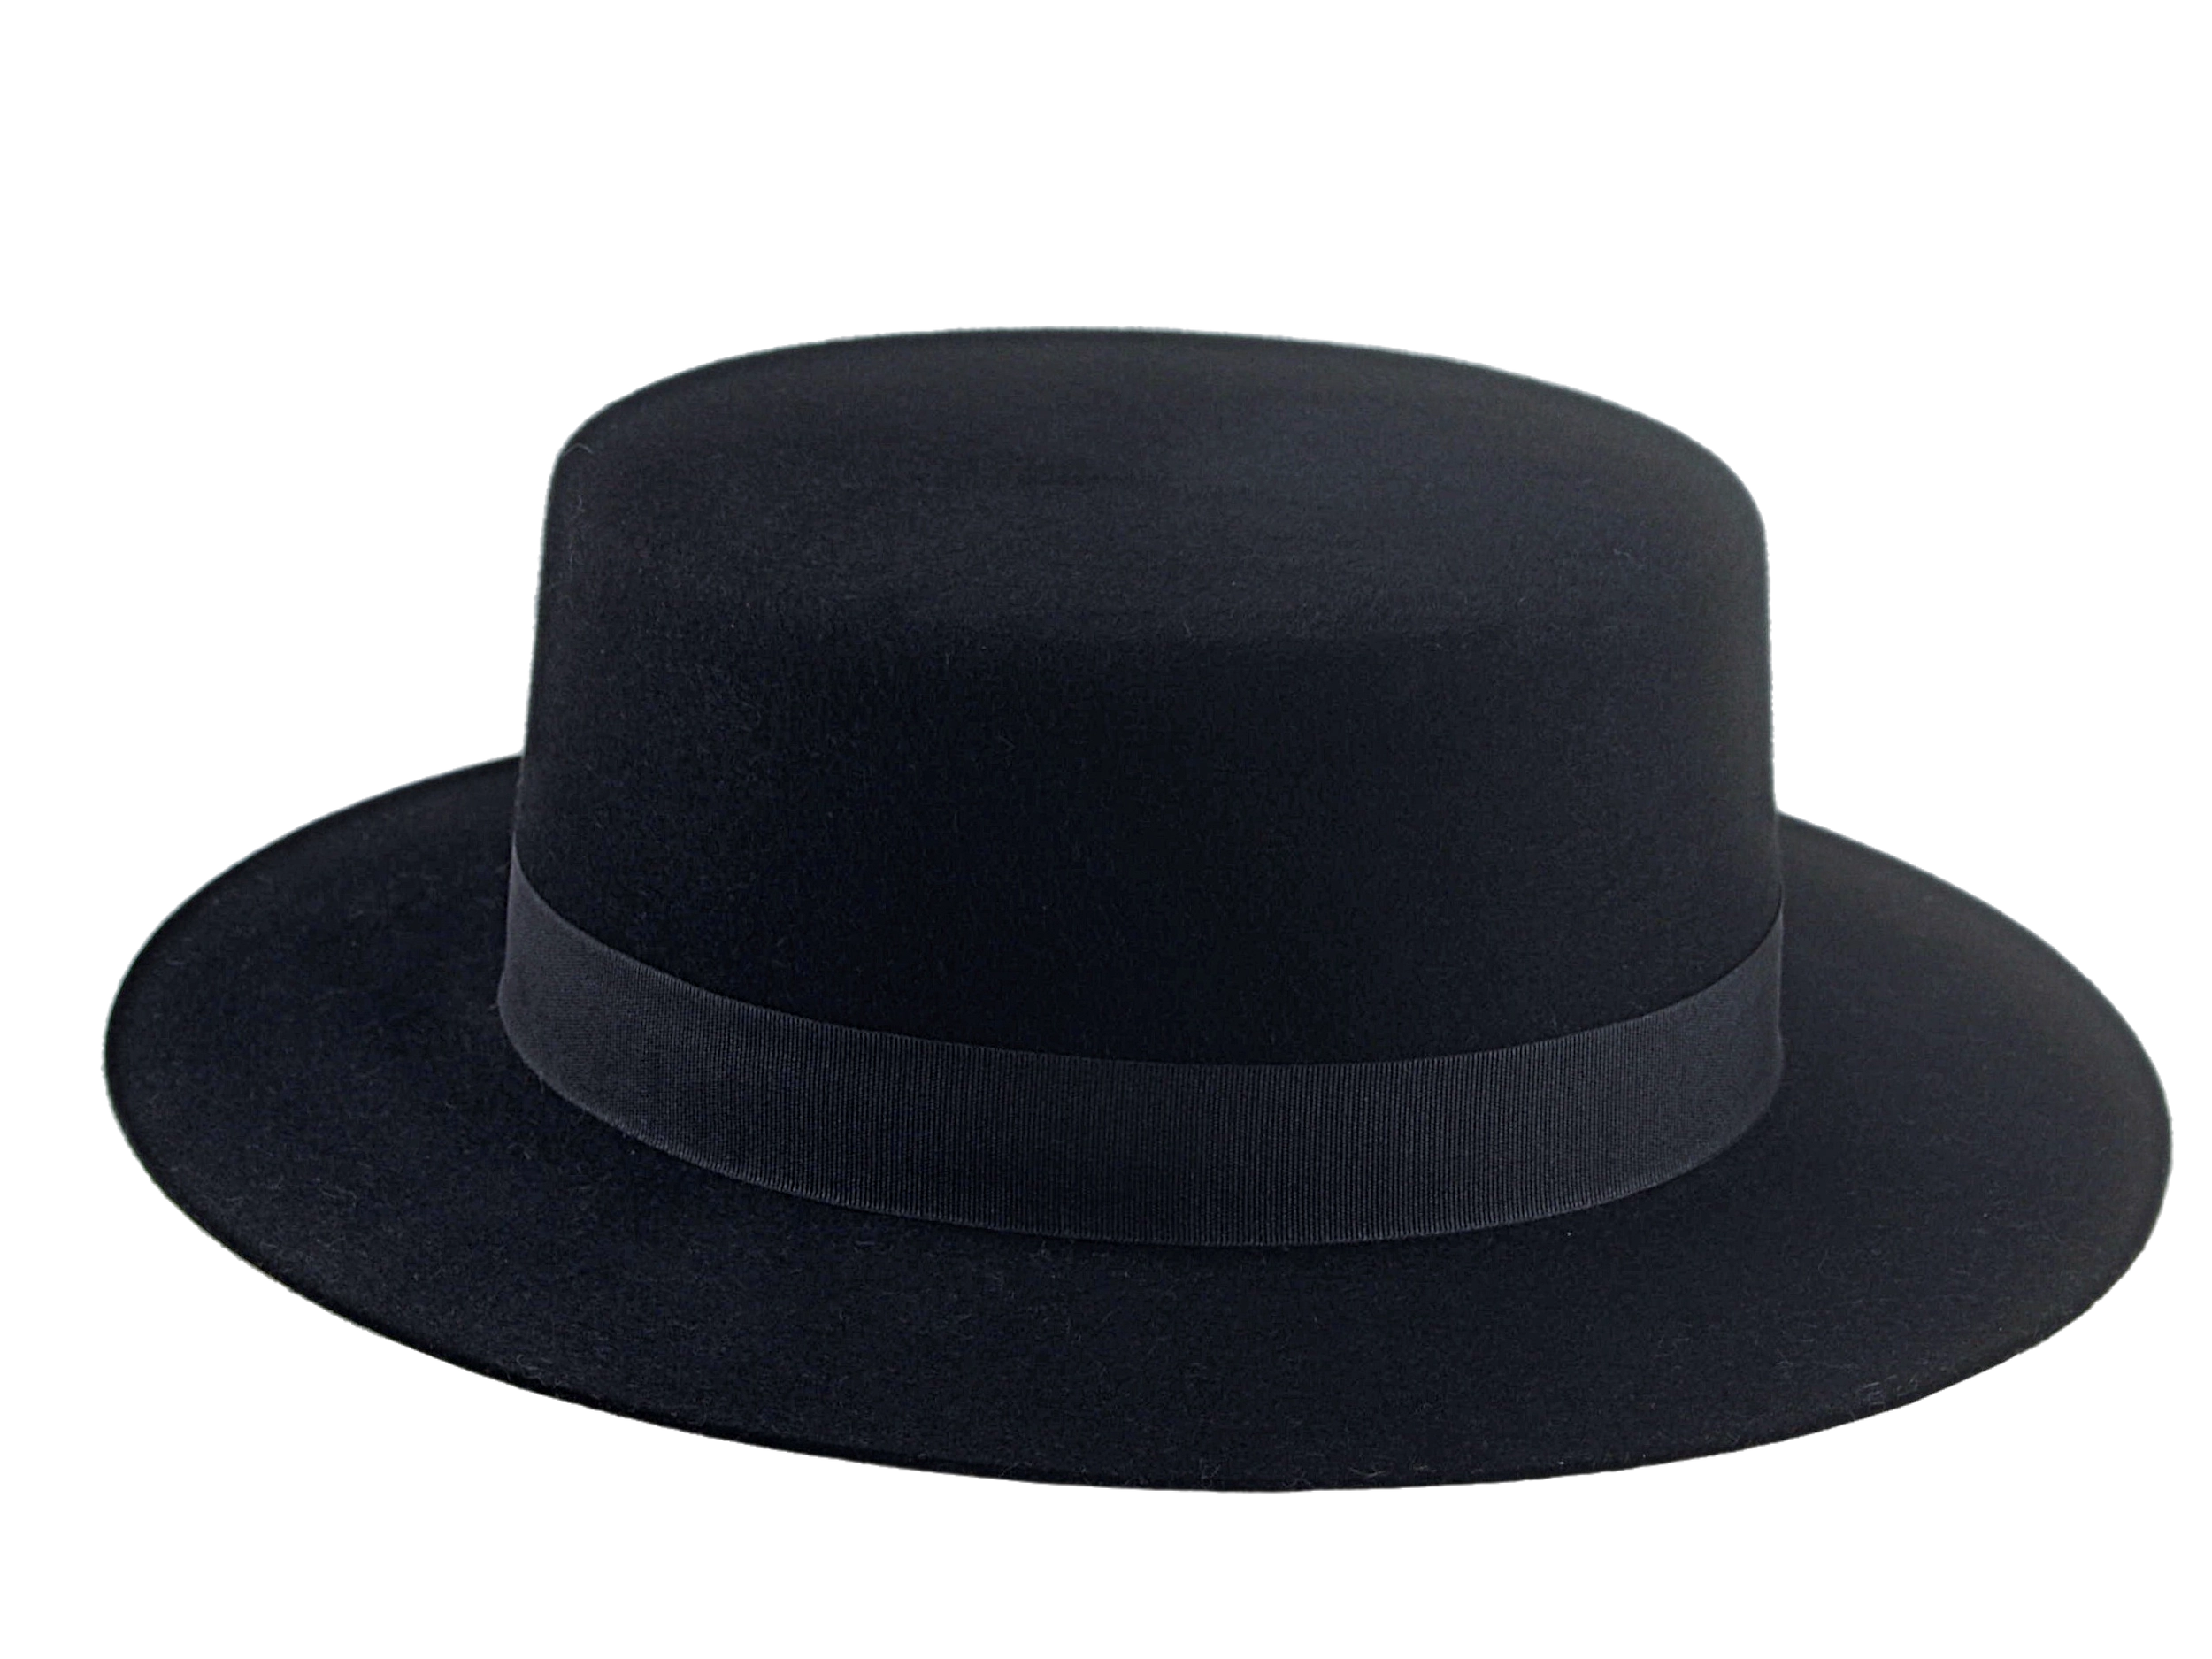 The Drover: Side perspective capturing the structured silhouette and the craftsmanship of the hat | Agnoulita Hats